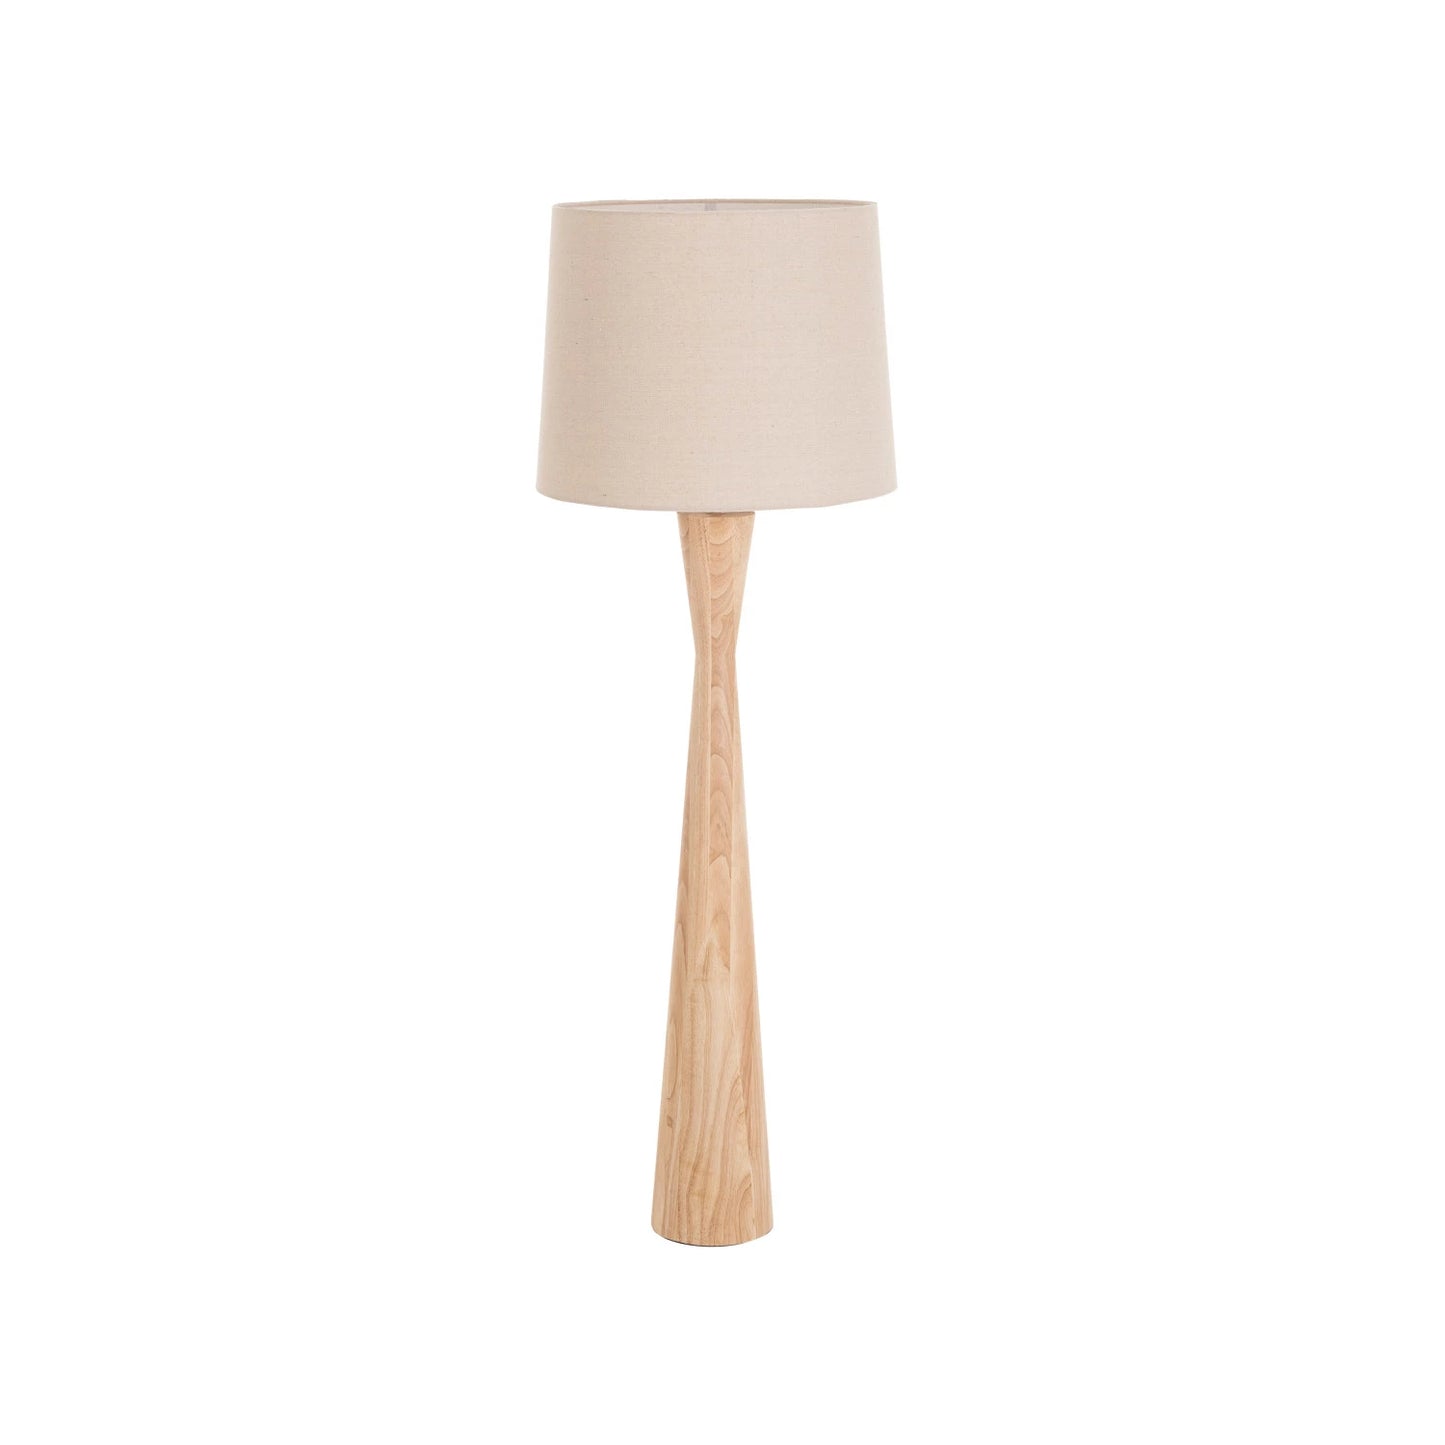 Rubberwood floor lamp with linen shade - Japandi Collection - #8771